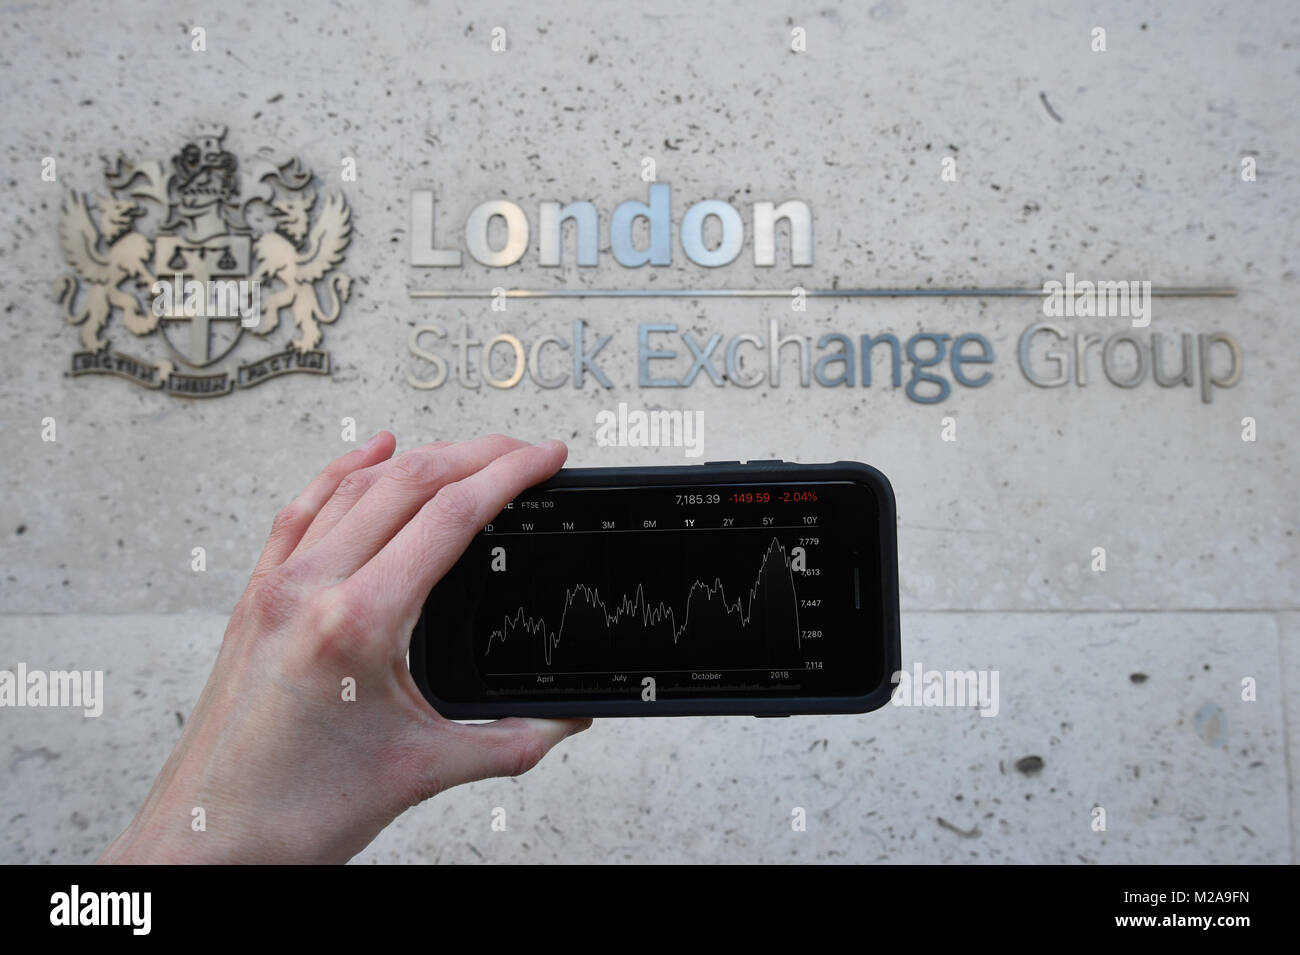 A view of the Stocks app on an iPhone against the London Stock Exchange sign in the City of London, as the FTSE 100 Index crashed on opening by more than 230 points to 7,104.94 as inflation fears continue to rock global markets. Stock Photo